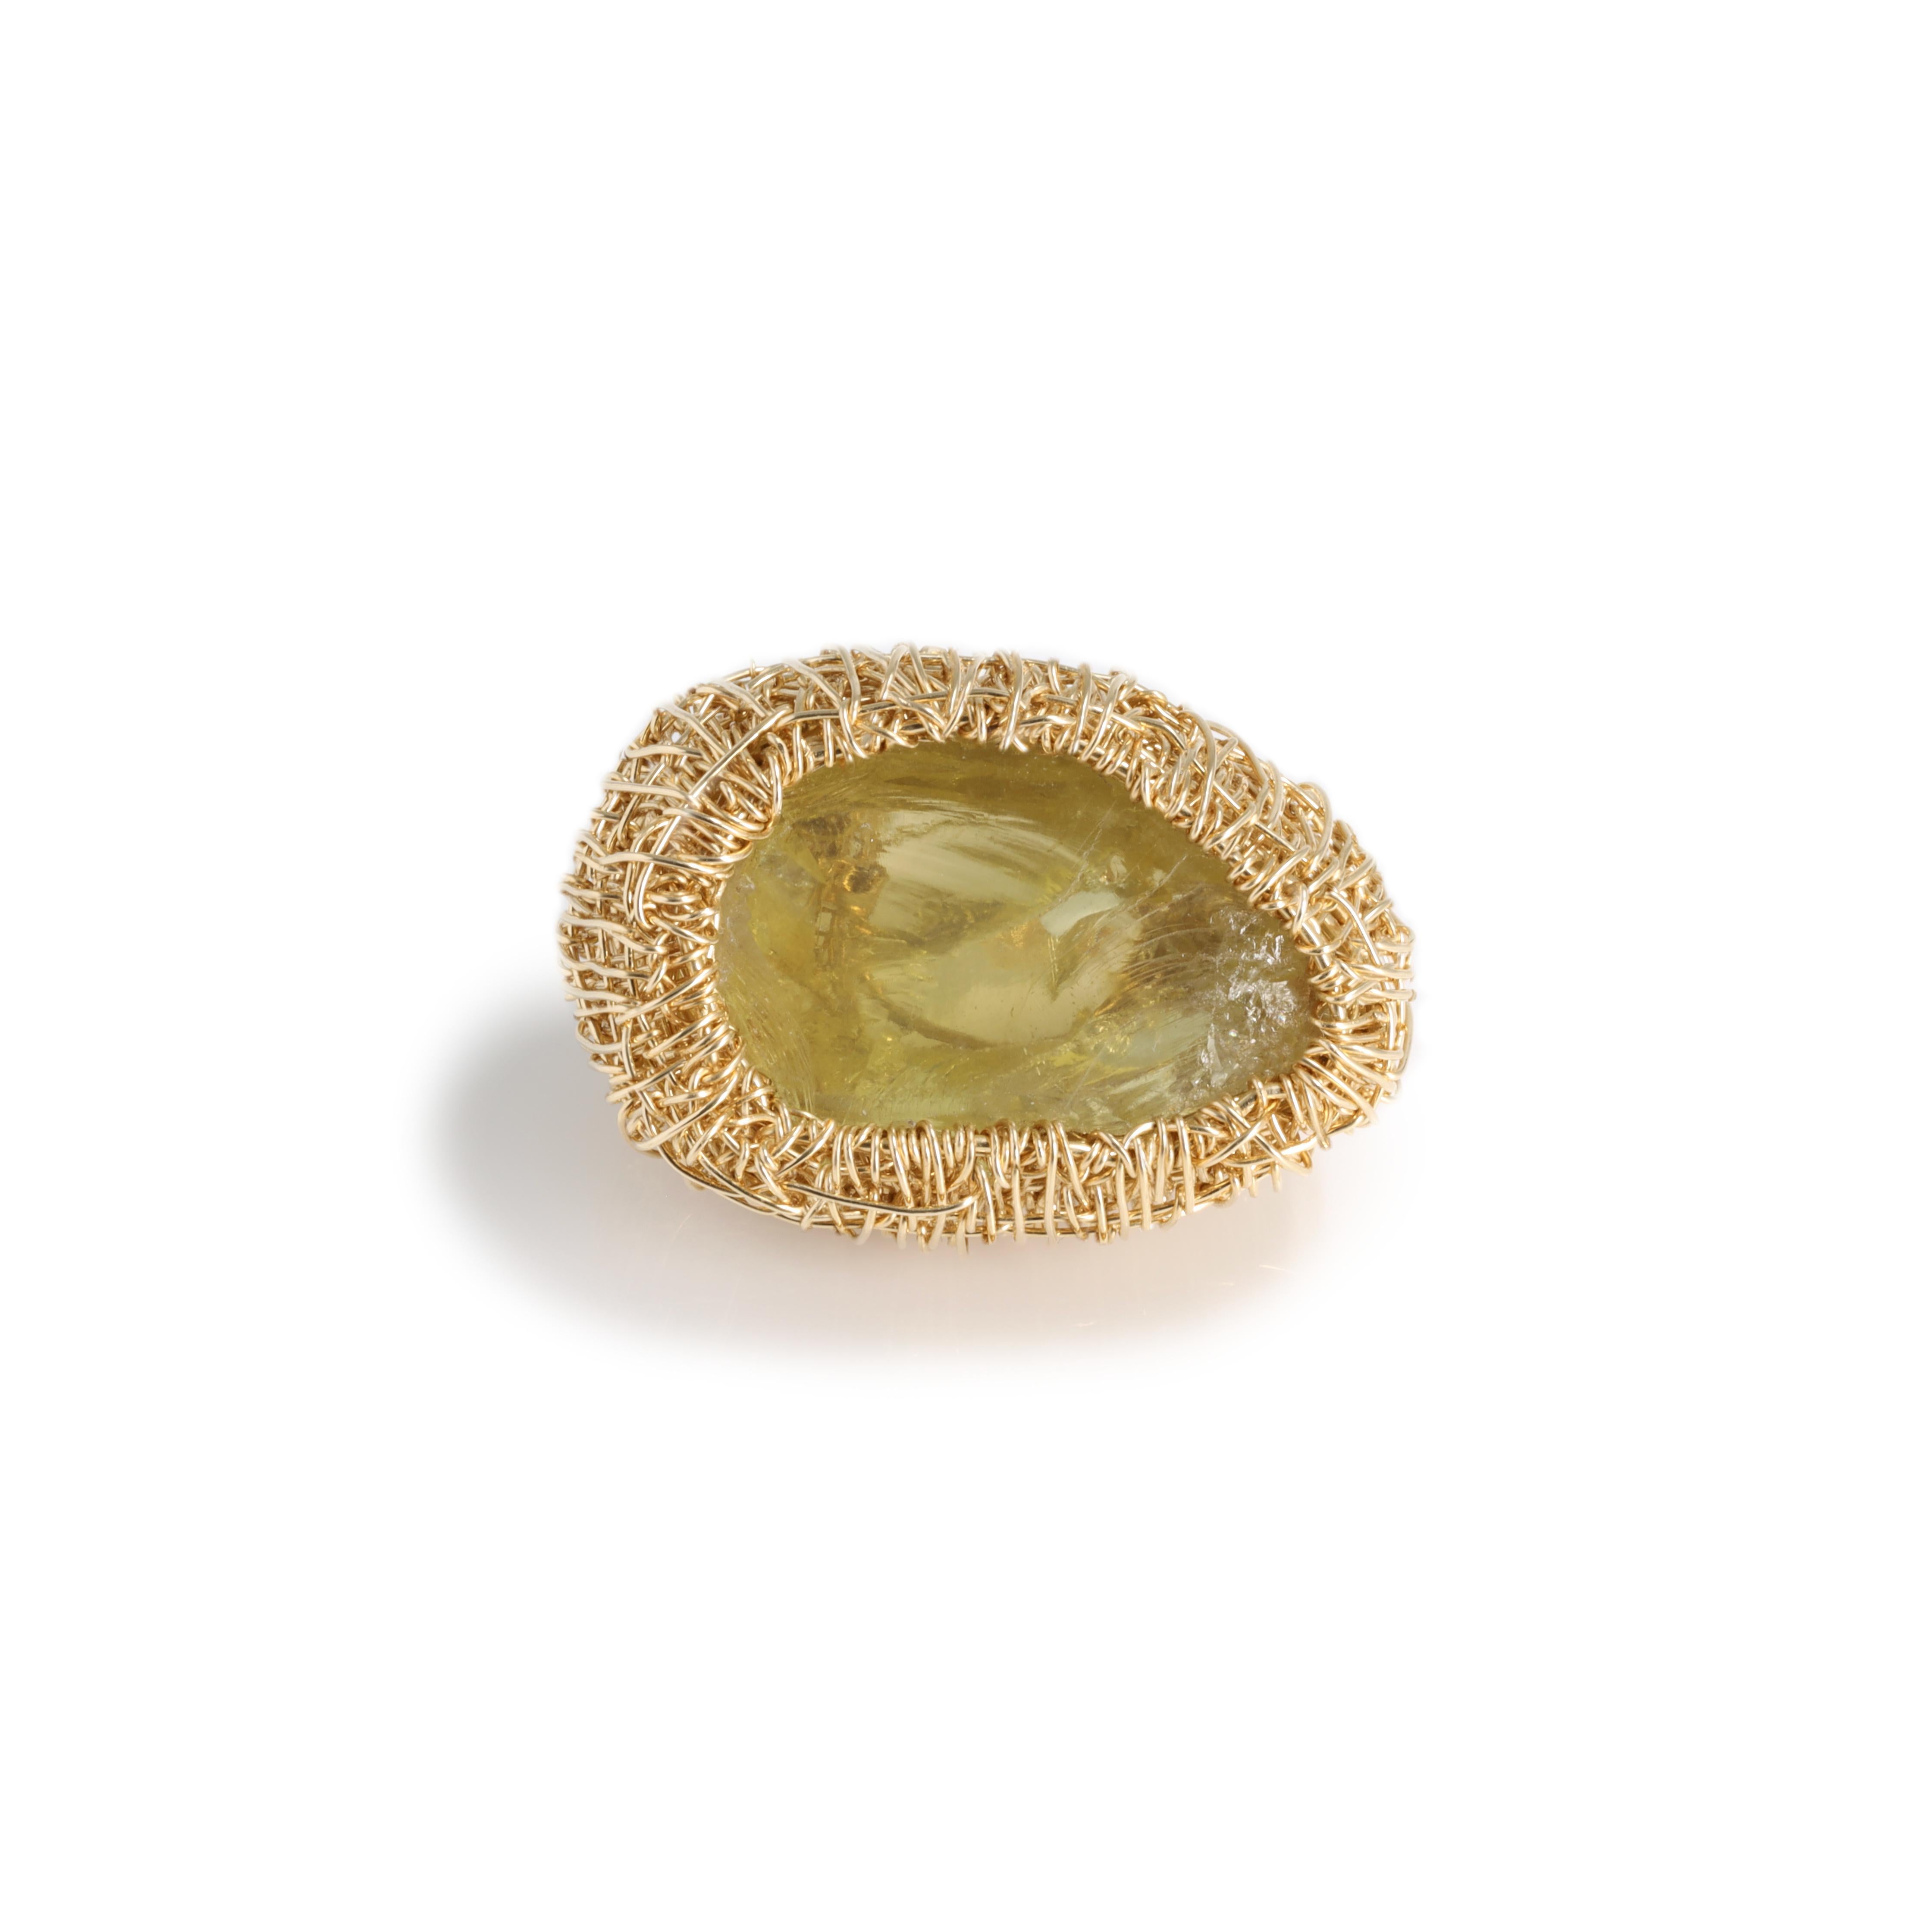 Lemon Quartz Raw Stone Cocktail Ring in One-Off 14kt Gold Filled by the Artist For Sale 3